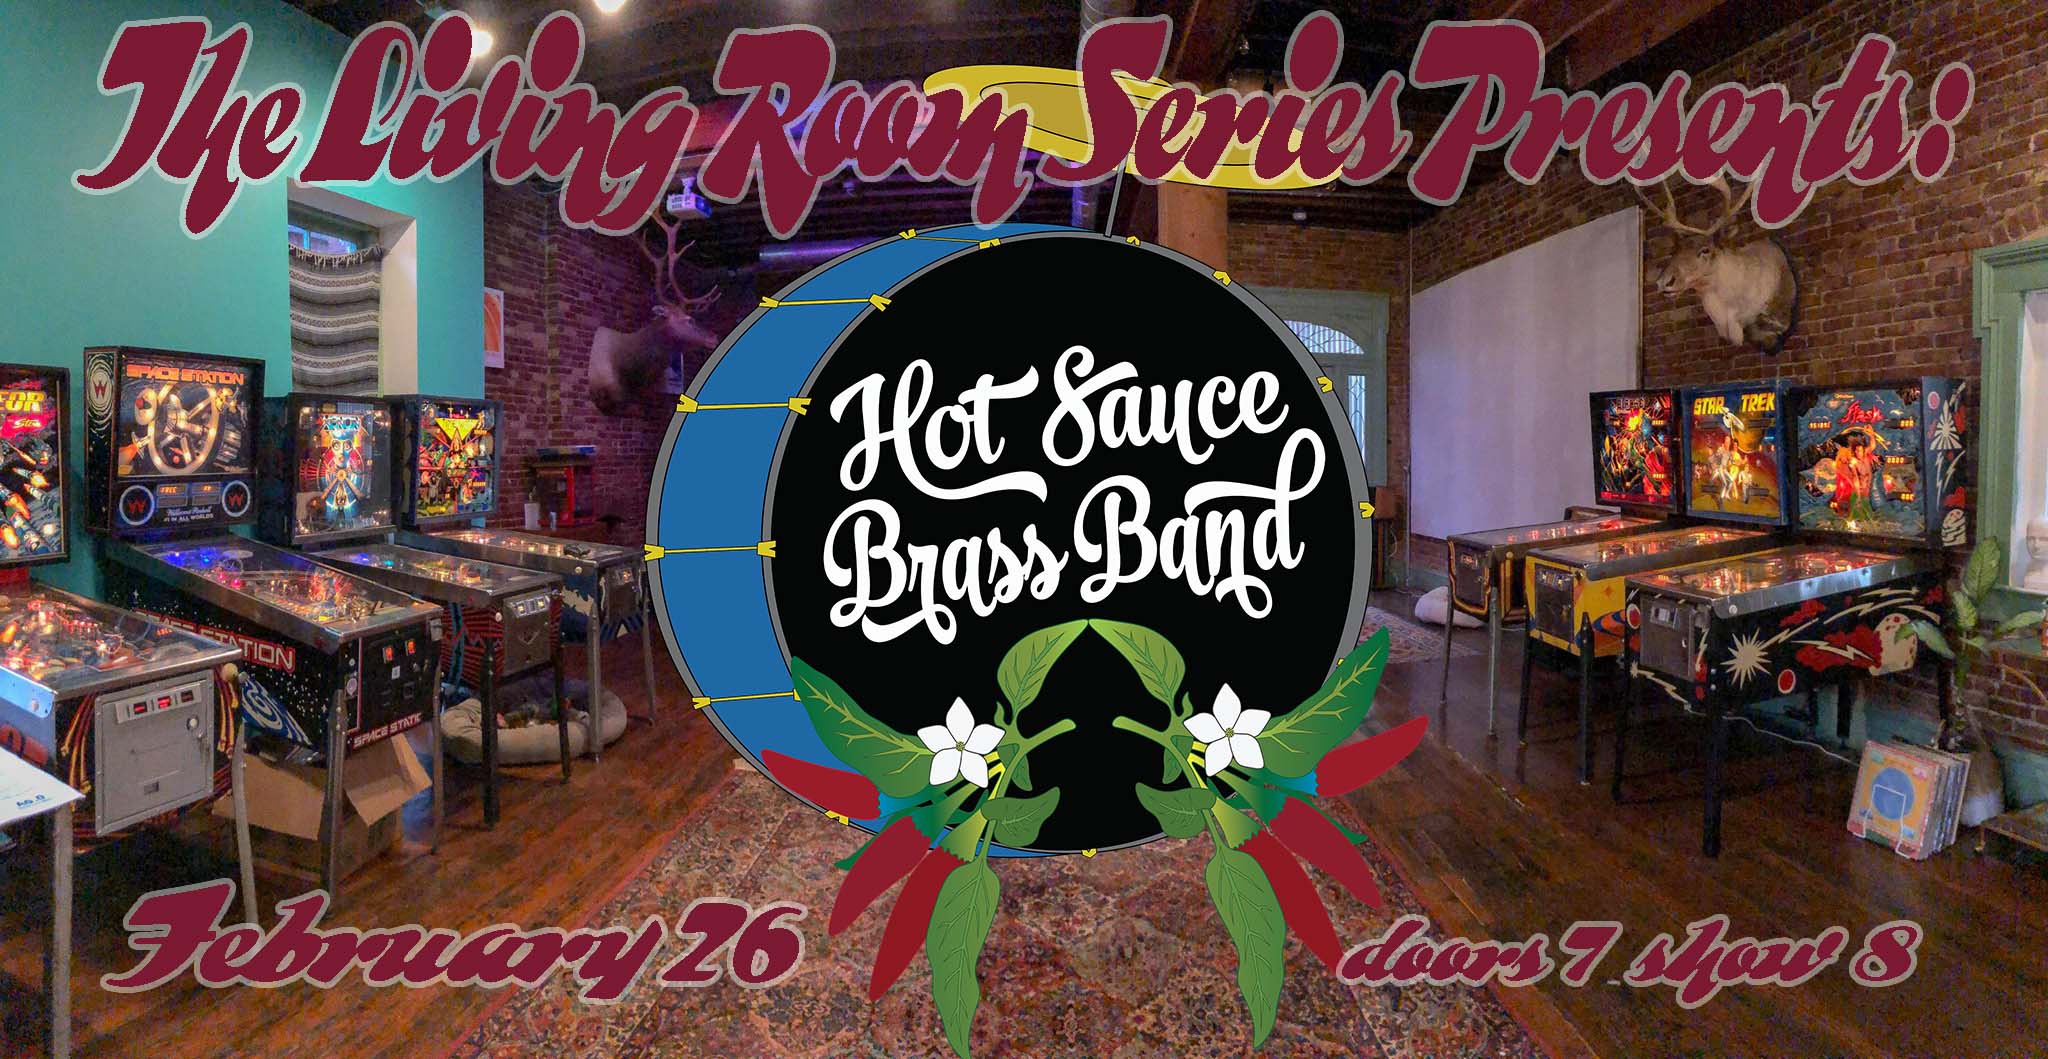 Mardi Gras Party with Hot Sauce Brass Band